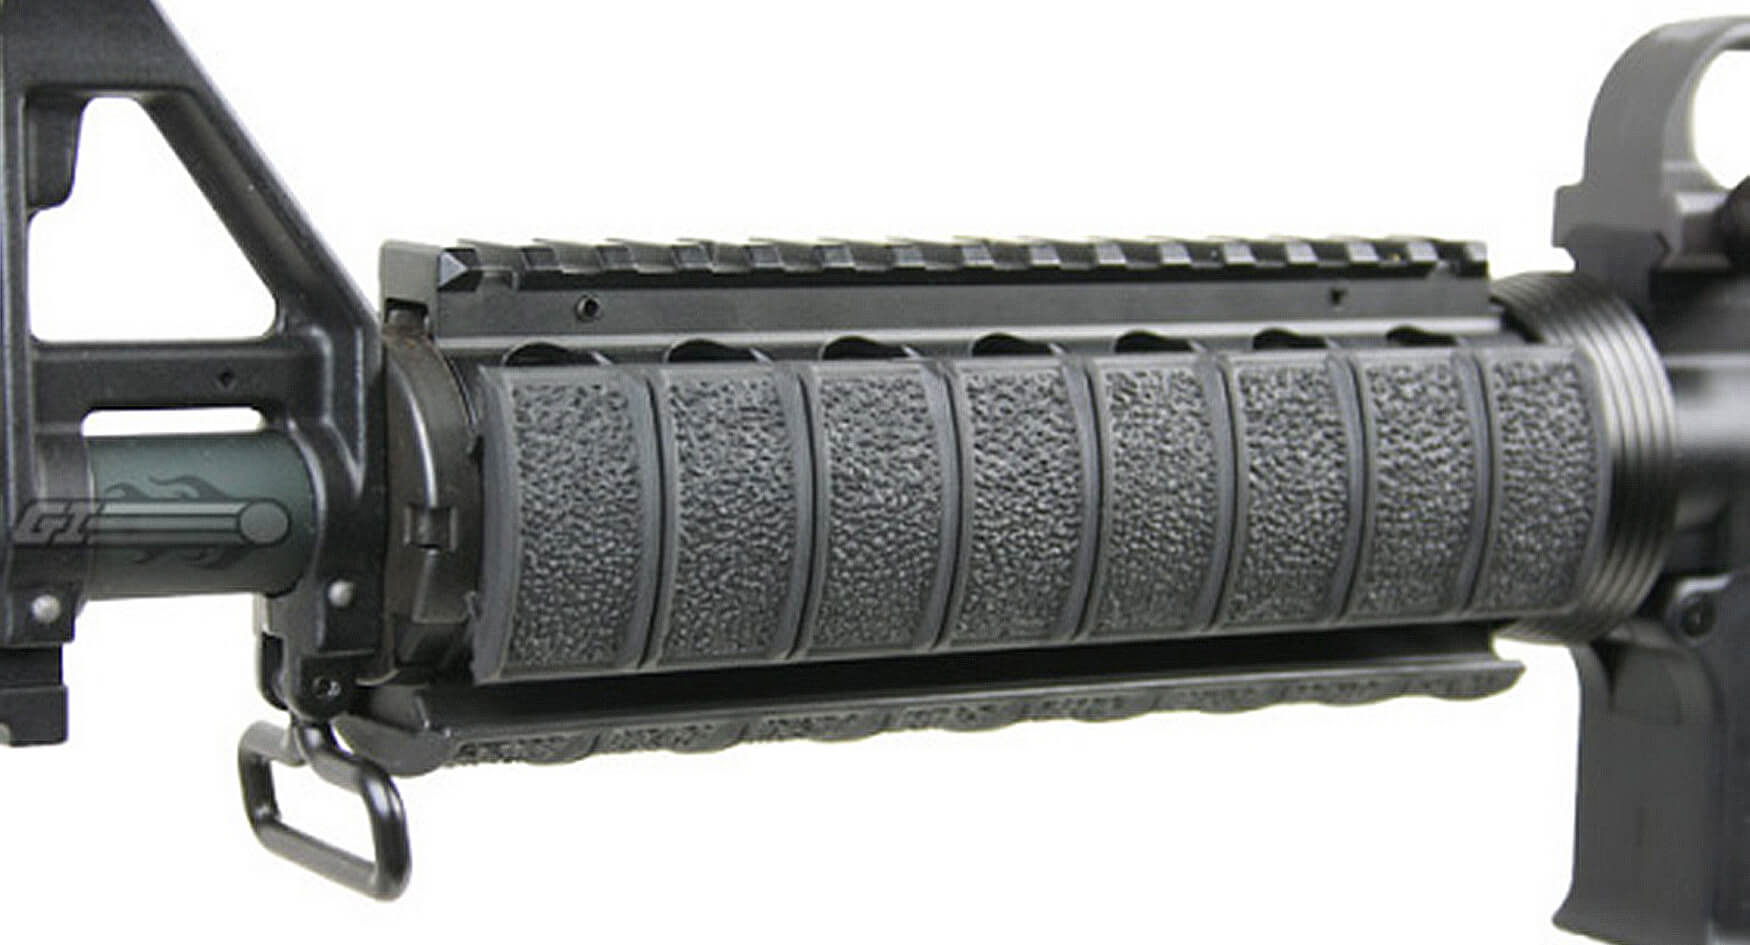 New 8 pieces Troy Rail cover for picatinny rail Airsoft Tan